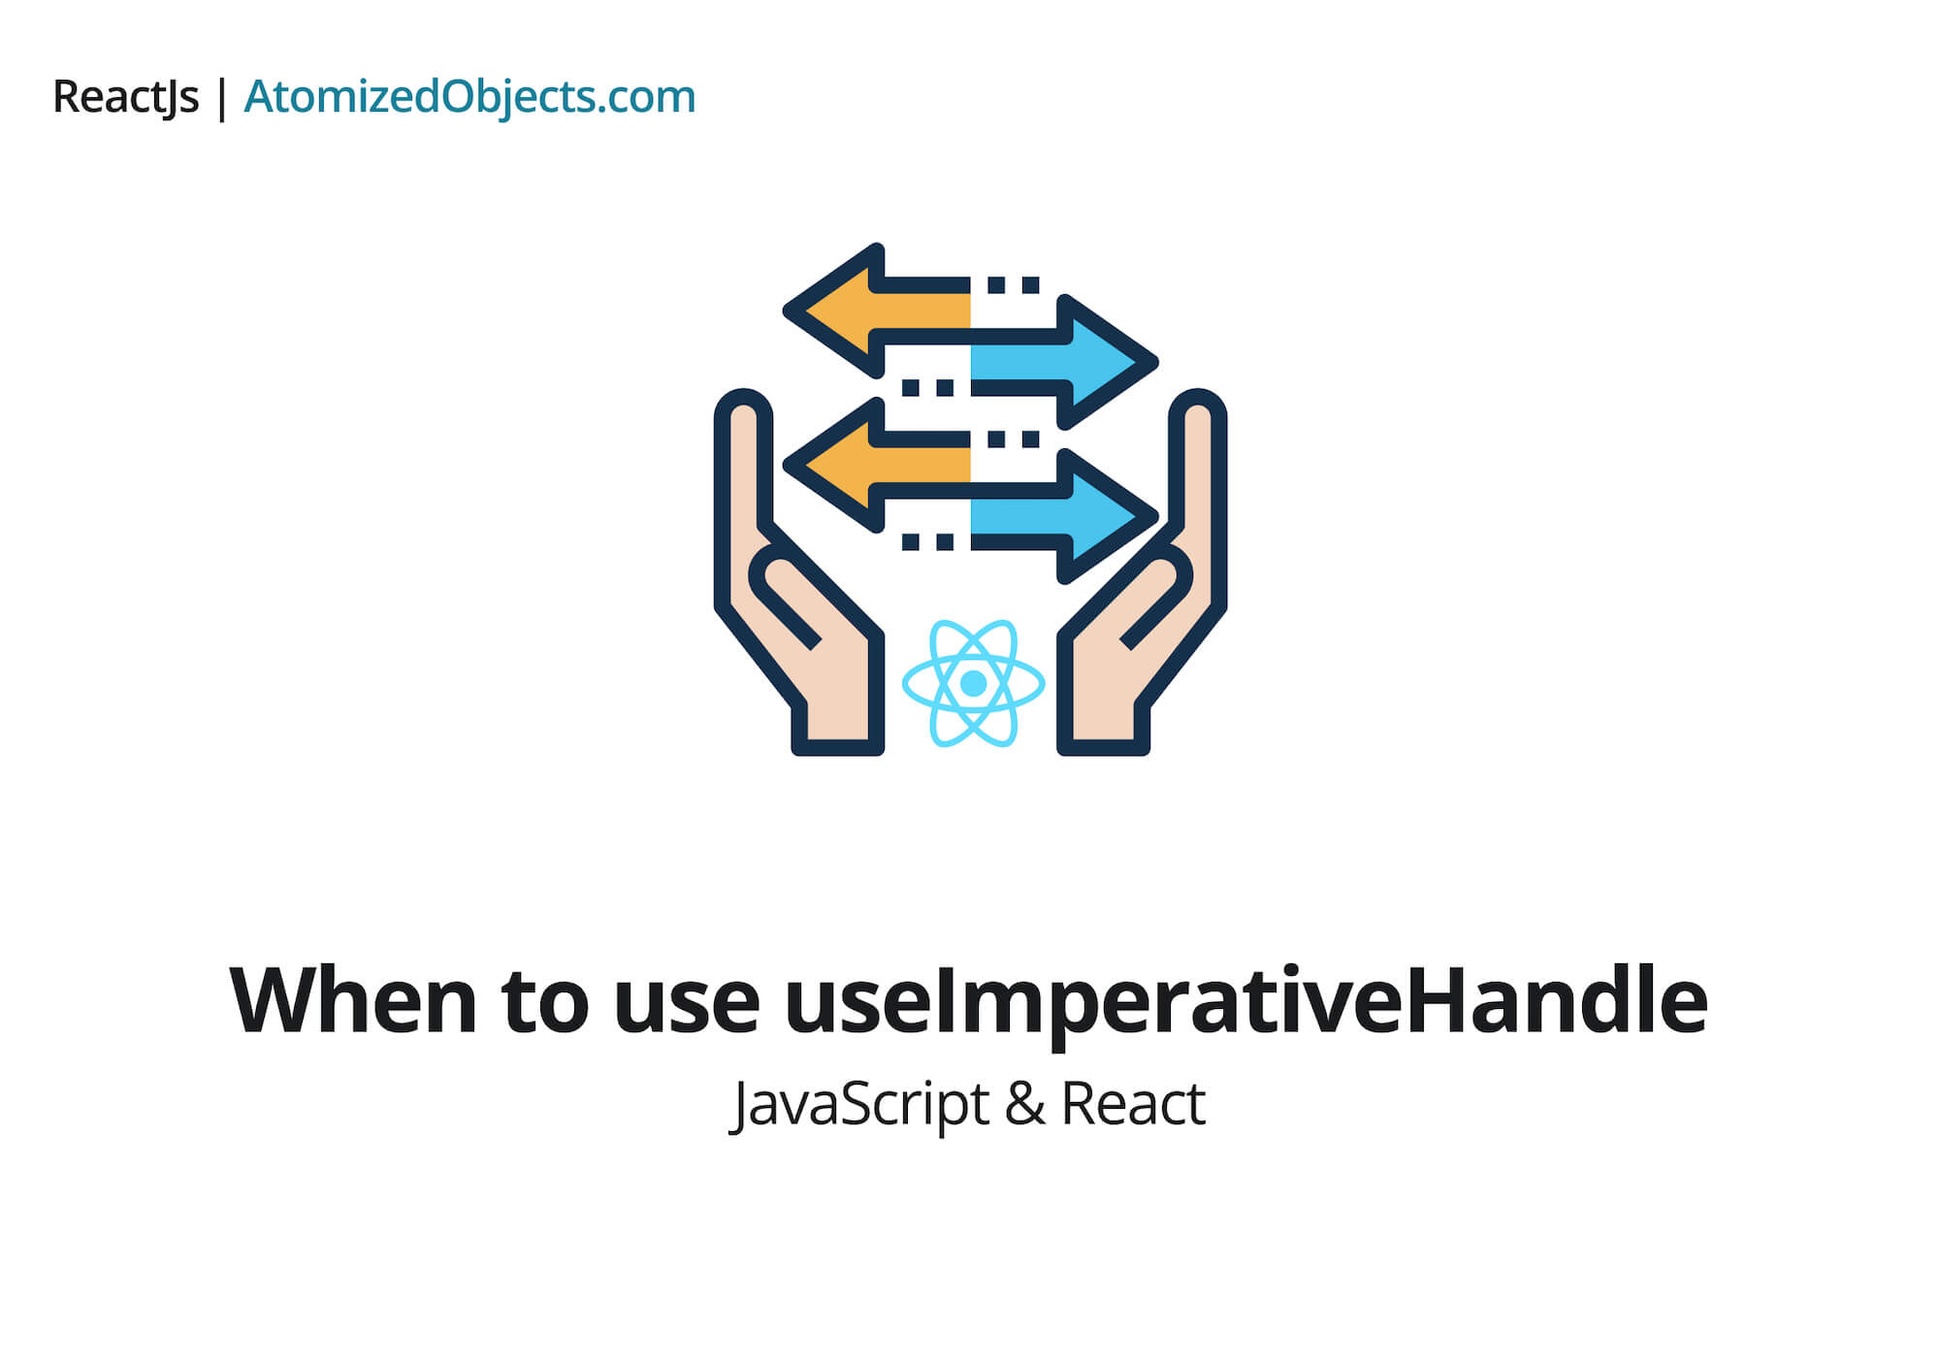 When to use useImperativeHandle